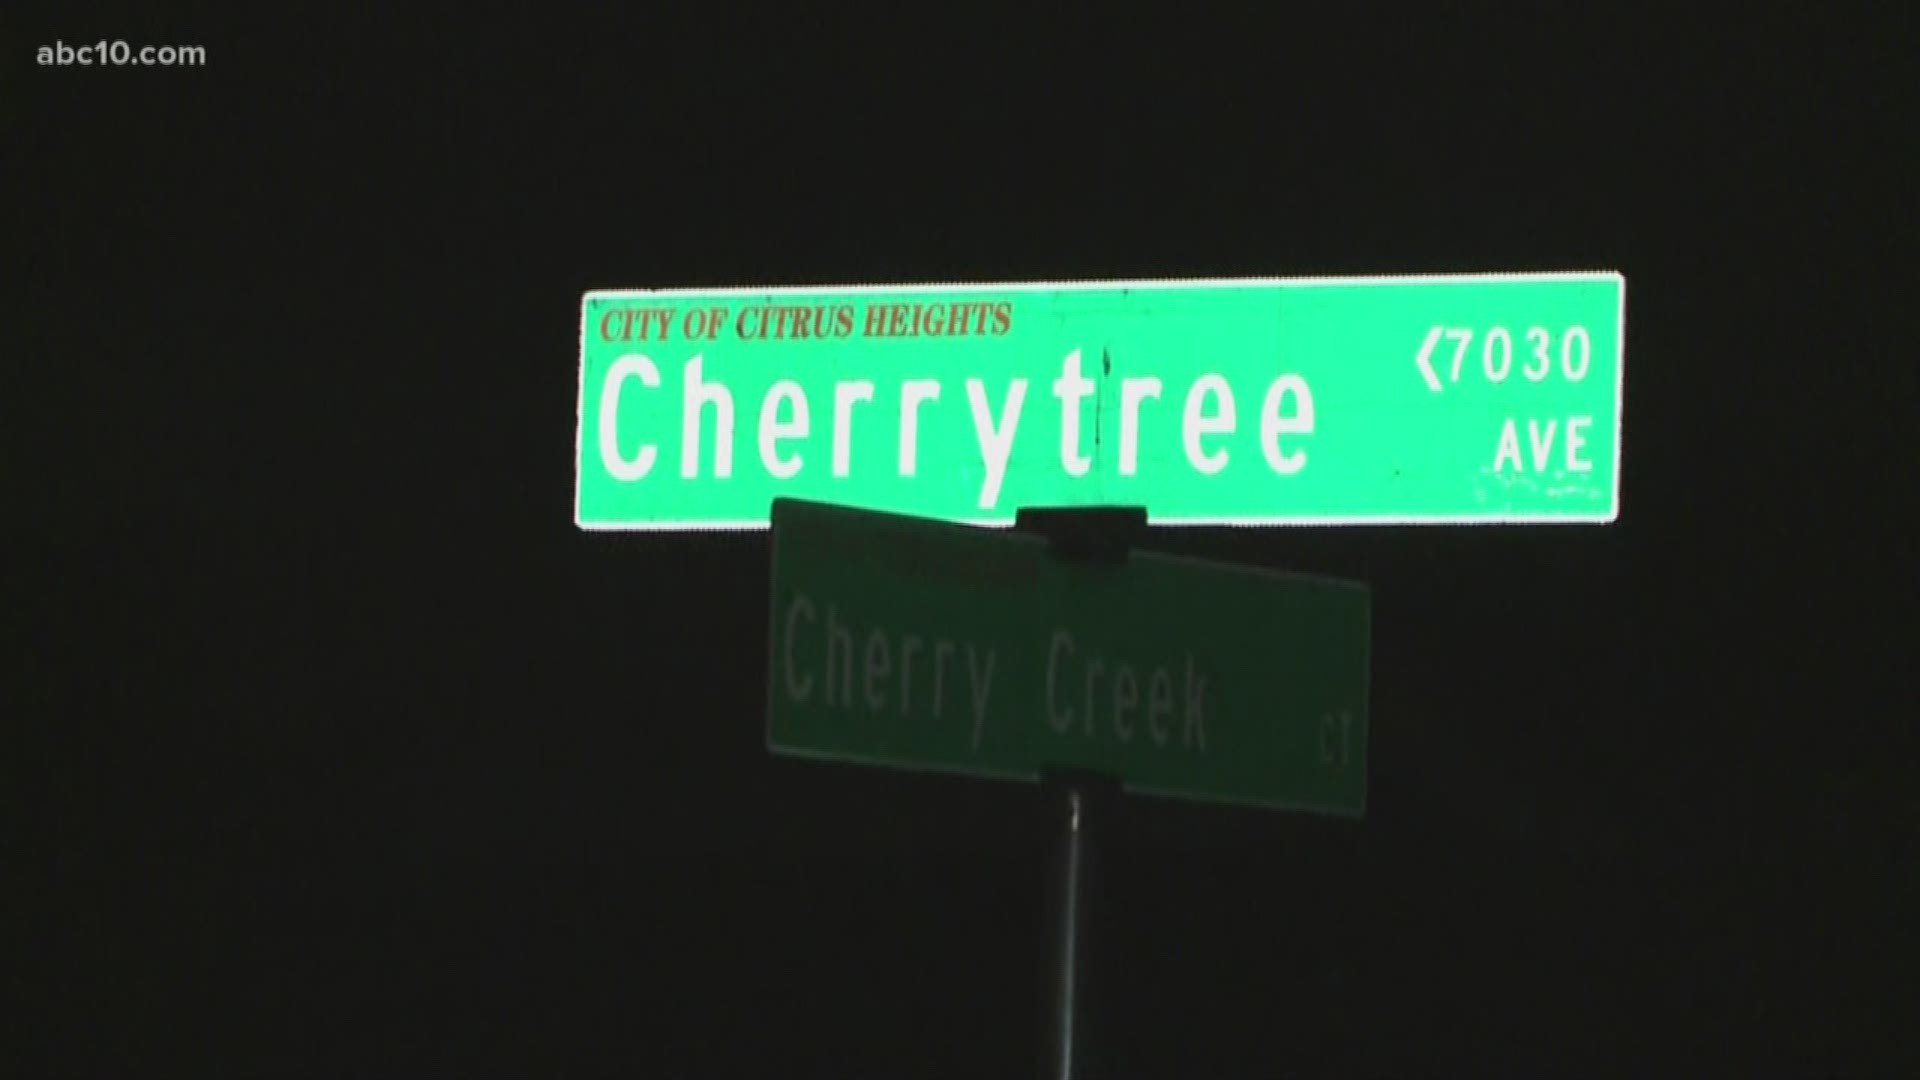 Mark S. Allen Googled Cherrytree Lane, like the one from "Mary Poppins," and found a Cherrytree Avenue. Then he surprised residents with tickets to see "Mary Poppins Returns."